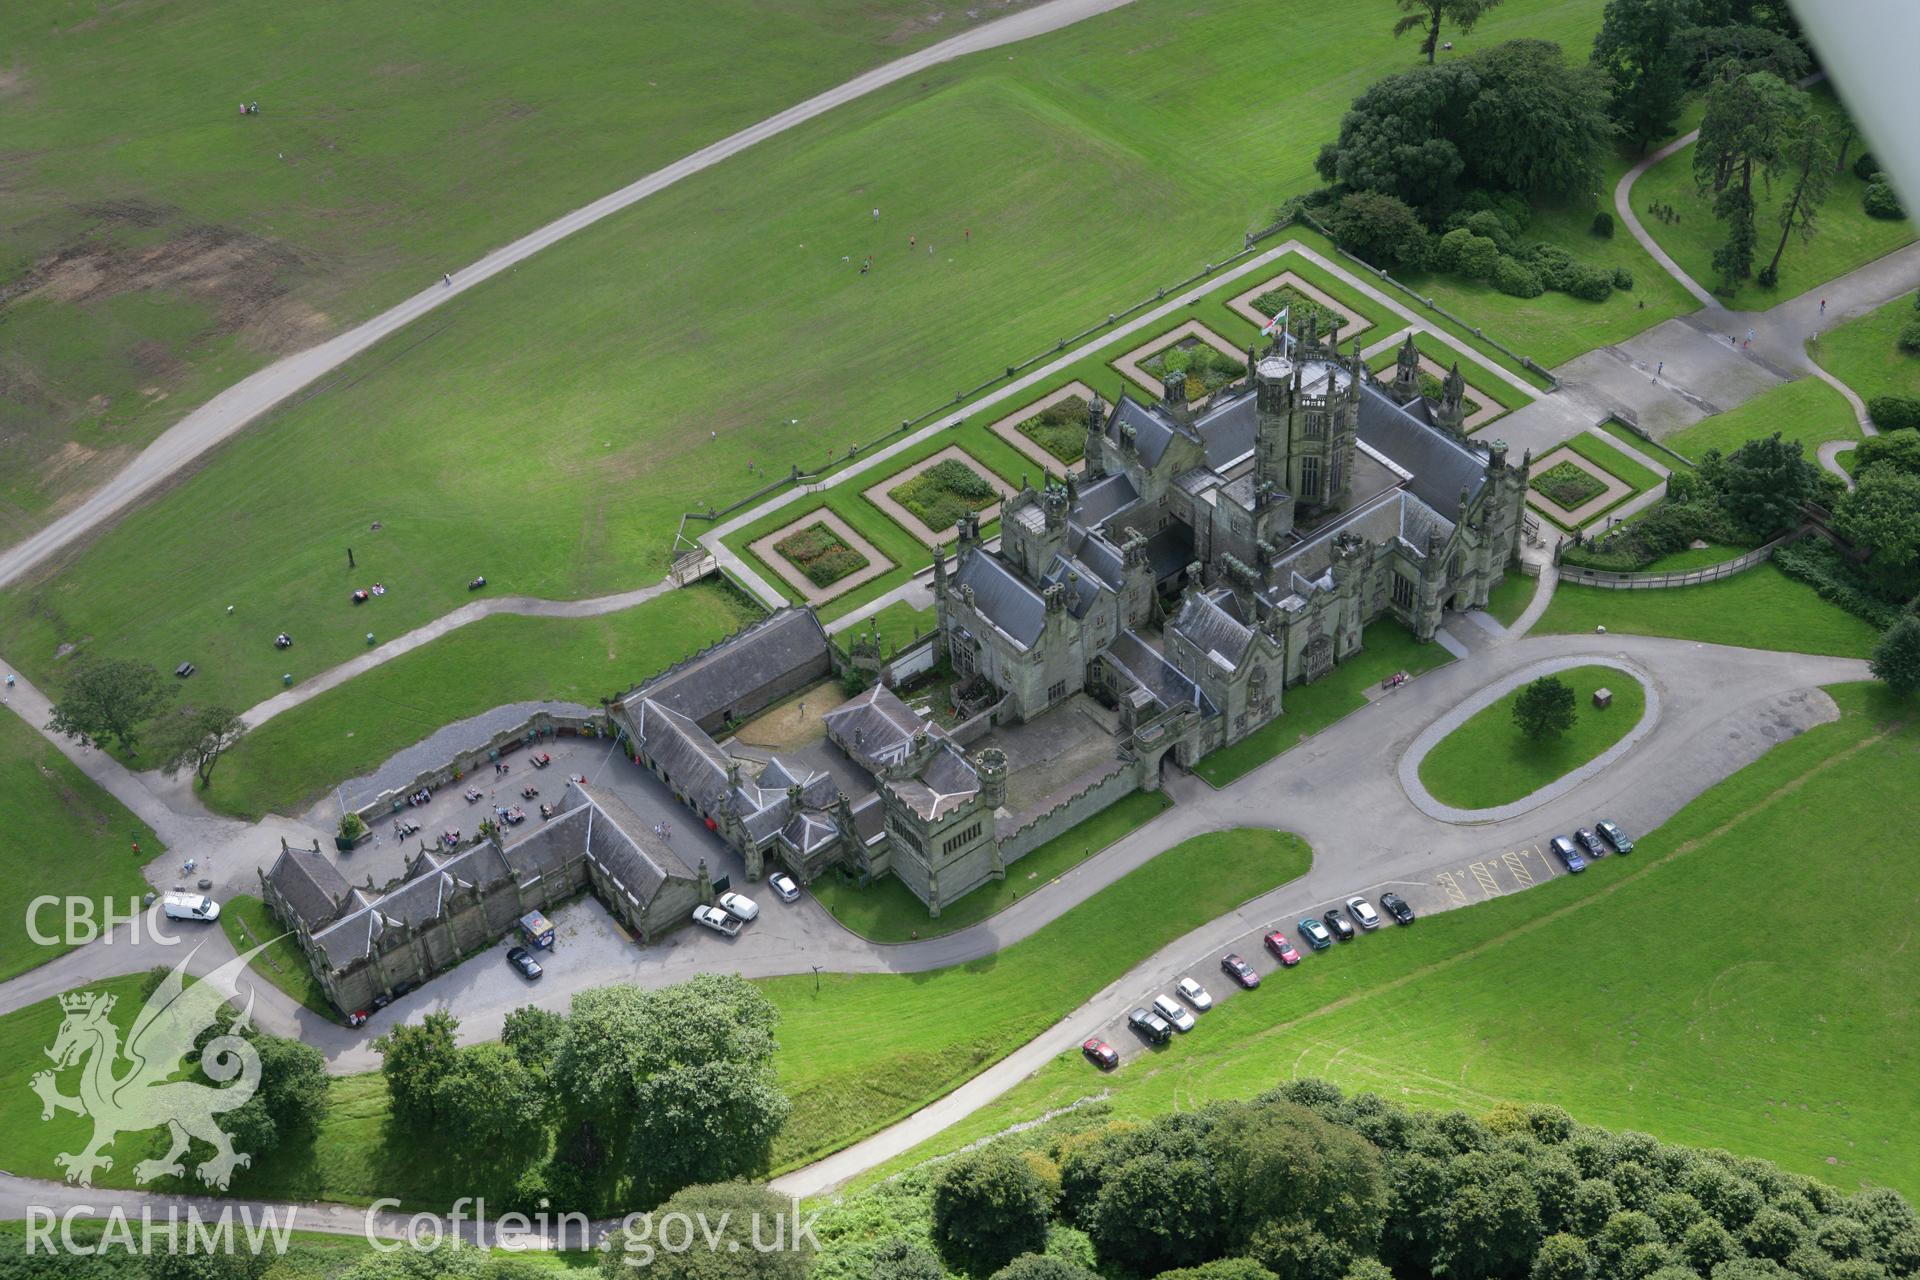 RCAHMW colour oblique aerial photograph of Margam Castle. Taken on 30 July 2007 by Toby Driver